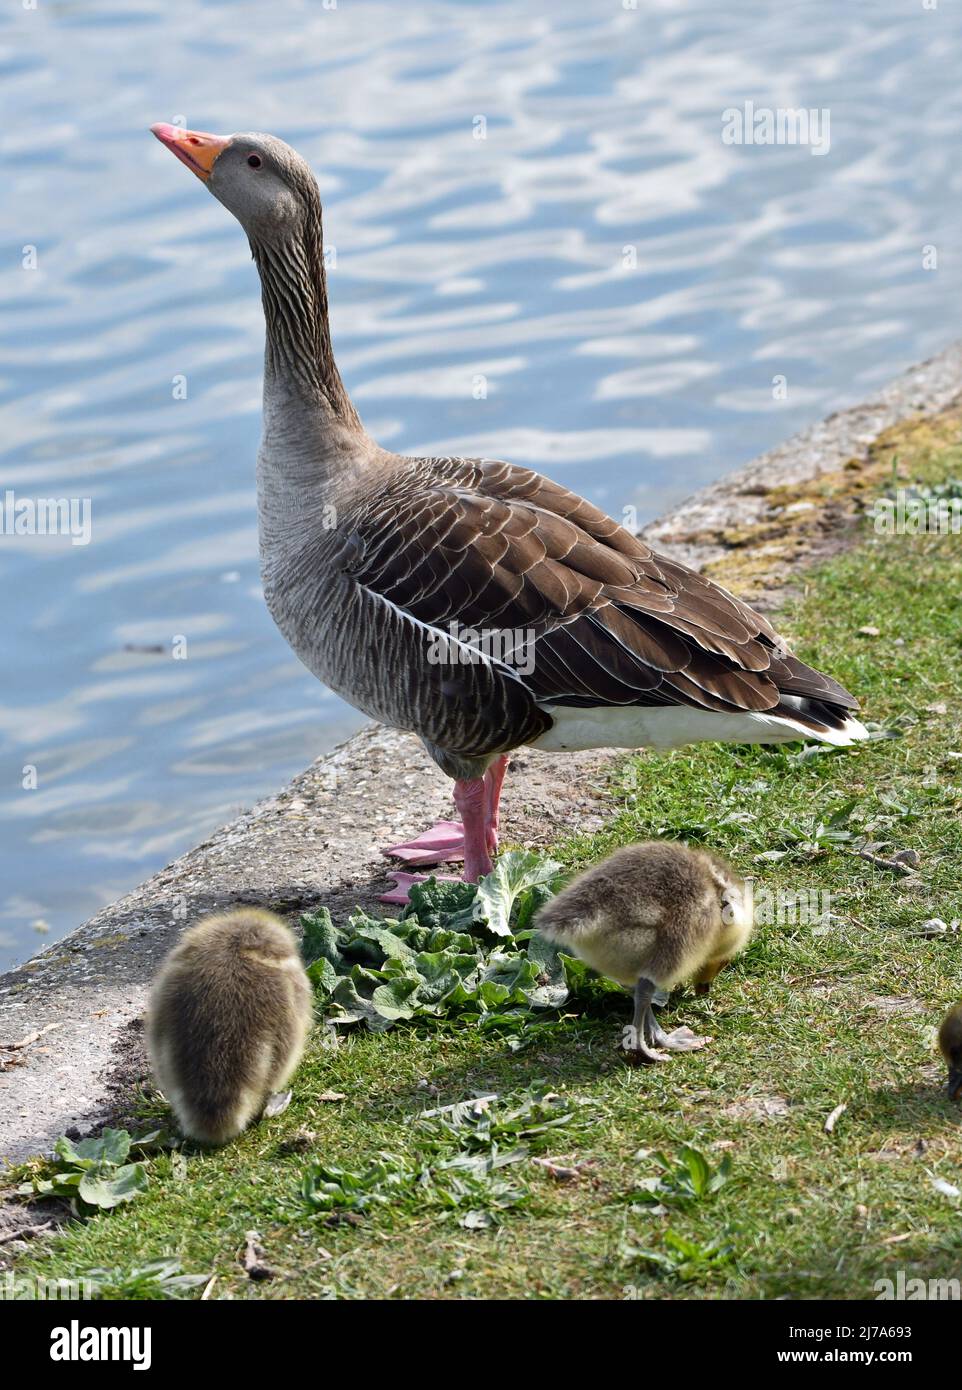 Spring at Tring Reservoirs. The birds have babies. Greylag goose with two goslings. Stock Photo